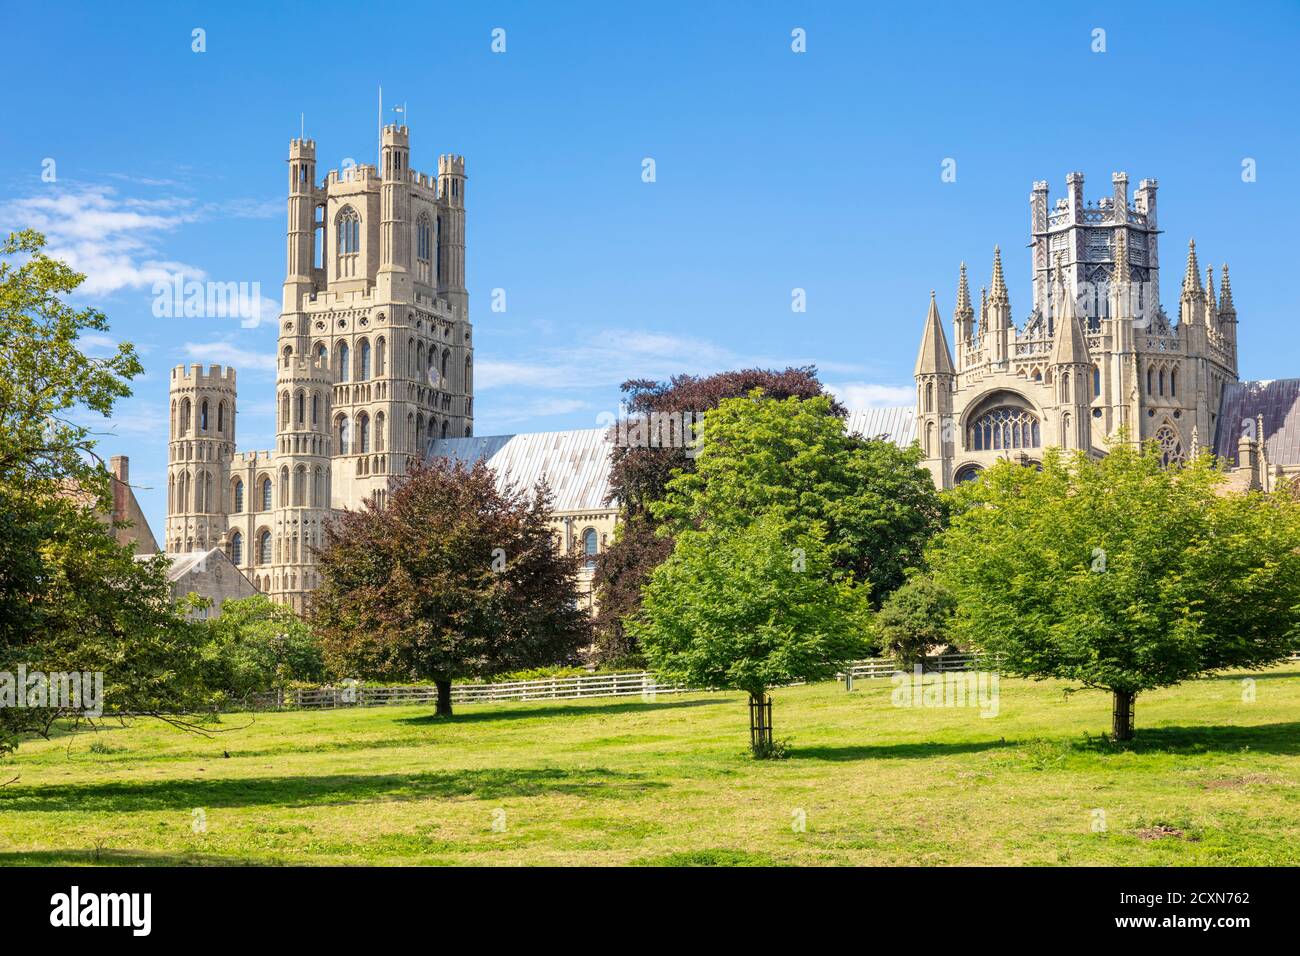 Ely uk Ely cathedral or Cathedral Church of the Holy and Undivided Trinity from Ely park Ely Anglican cathedral Ely Cambridgeshire England UK GB Stock Photo